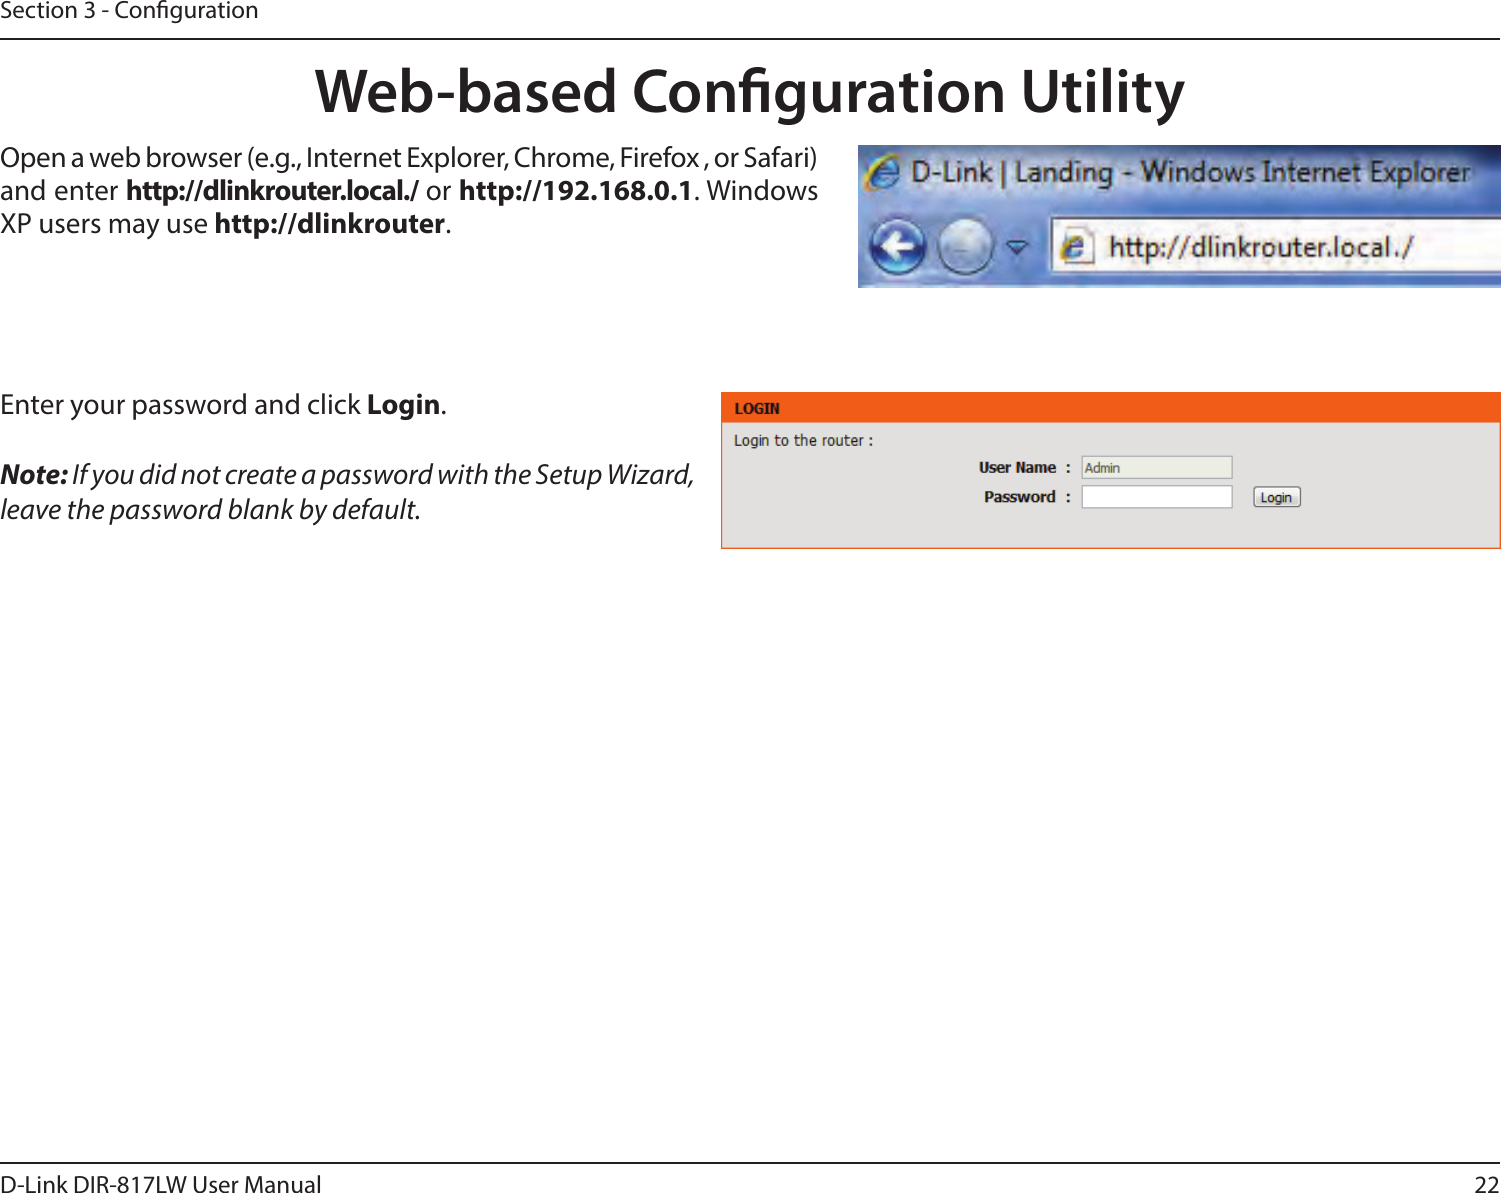 22D-Link DIR-817LW User ManualSection 3 - CongurationWeb-based Conguration UtilityEnter your password and click Login.  Note: If you did not create a password with the Setup Wizard, leave the password blank by default.Open a web browser (e.g., Internet Explorer, Chrome, Firefox , or Safari) and enter http://dlinkrouter.local./ or http://192.168.0.1. Windows XP users may use http://dlinkrouter.